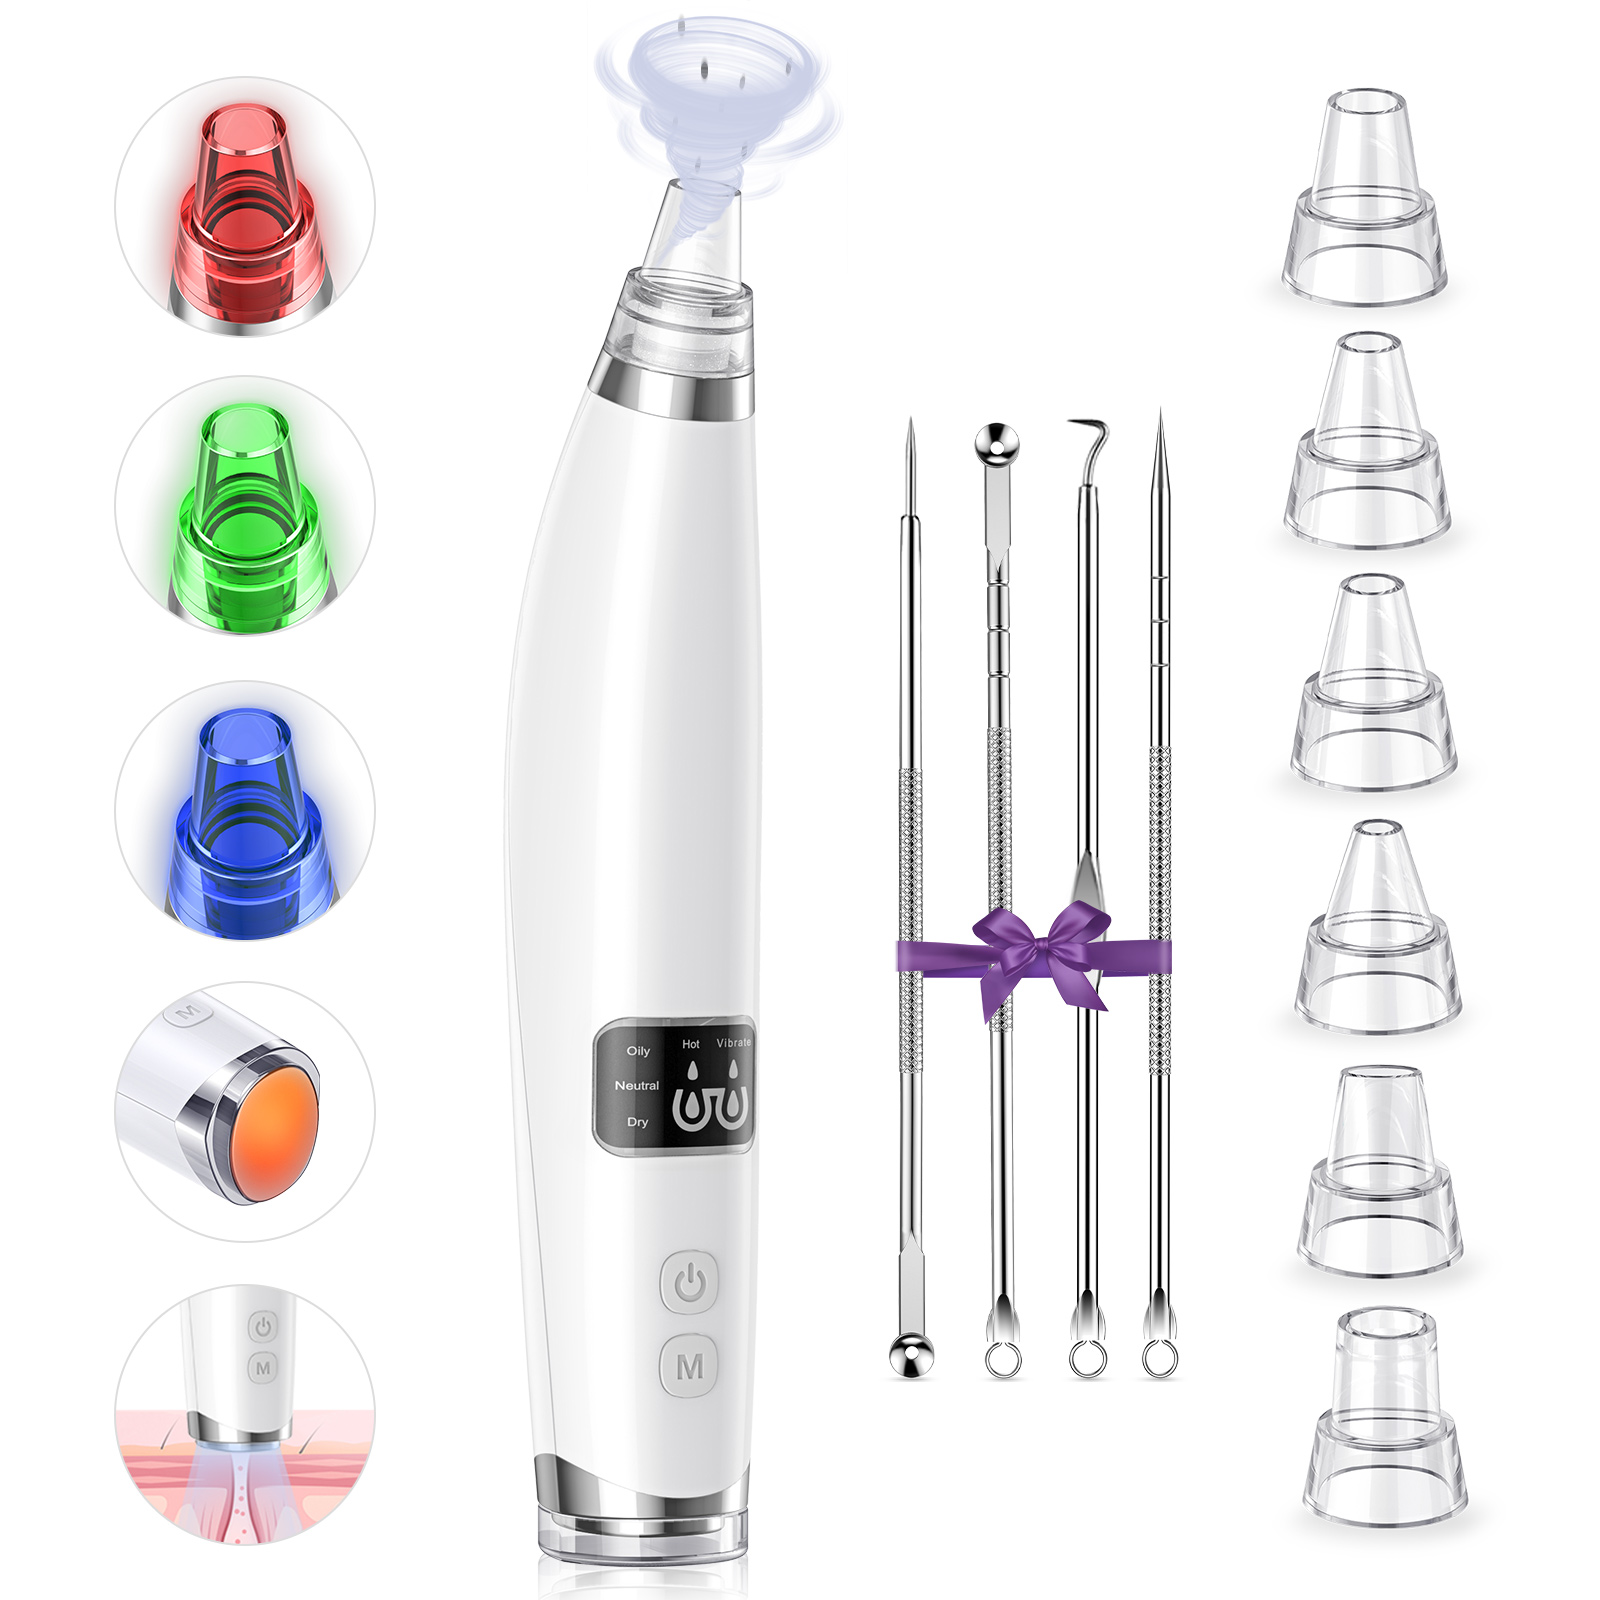 Blackhead Remover Pore Vacuum TEATTY Electric Facial Blackhead Remover Vacuum with Hot Compress Vibration Function USB Rechargeable Comedone Extractor with 6 Suction Probes & 4 Acne Removal Tool